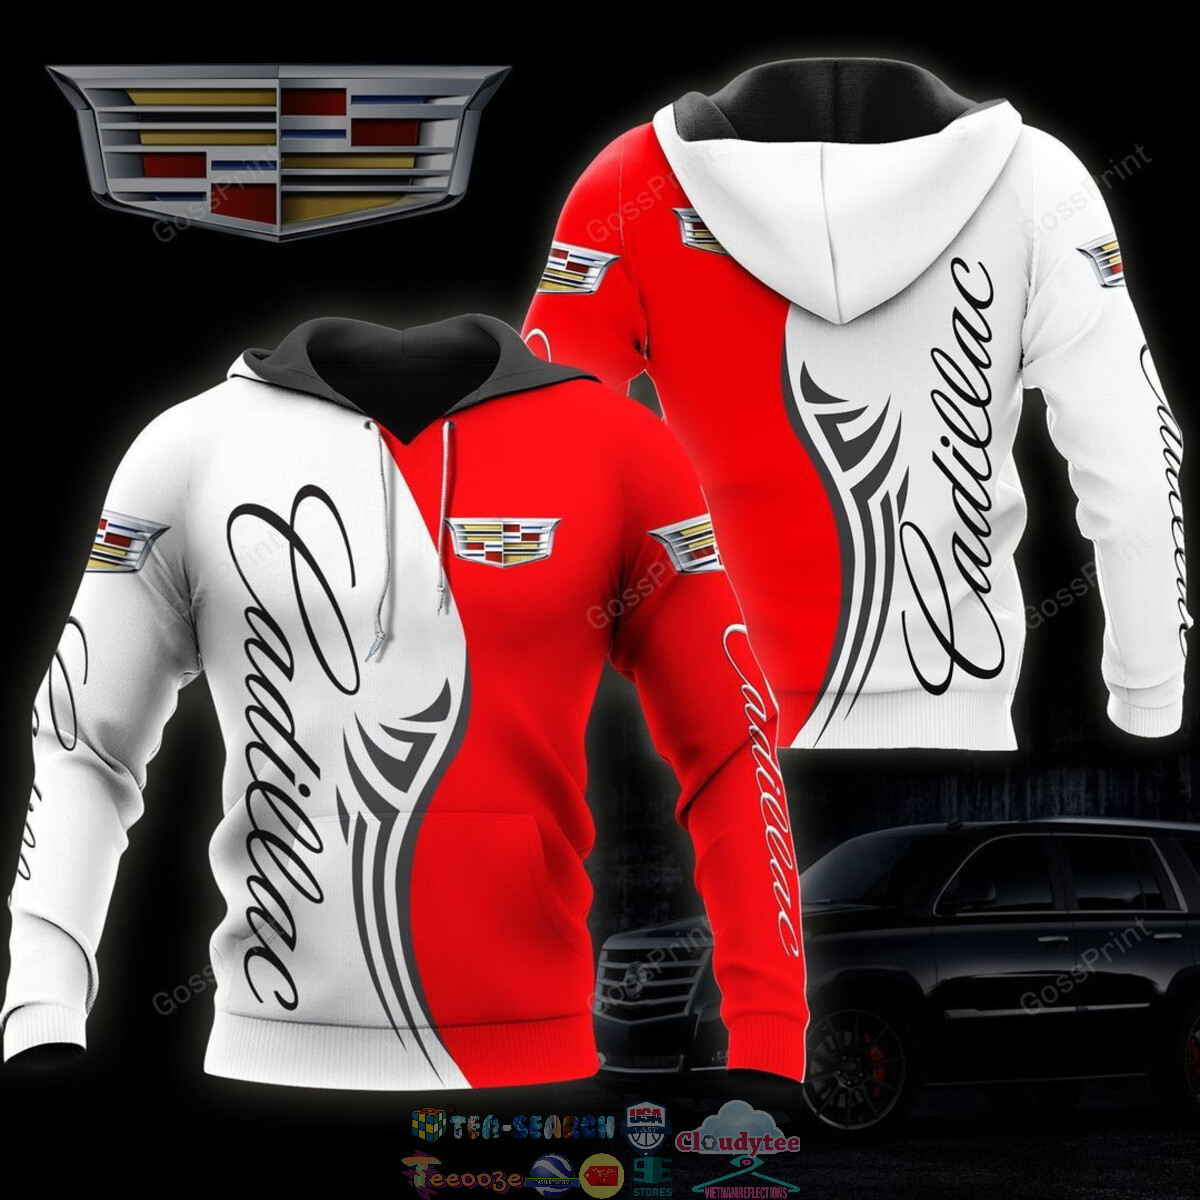 Cadillac ver 2 3D hoodie and t-shirt